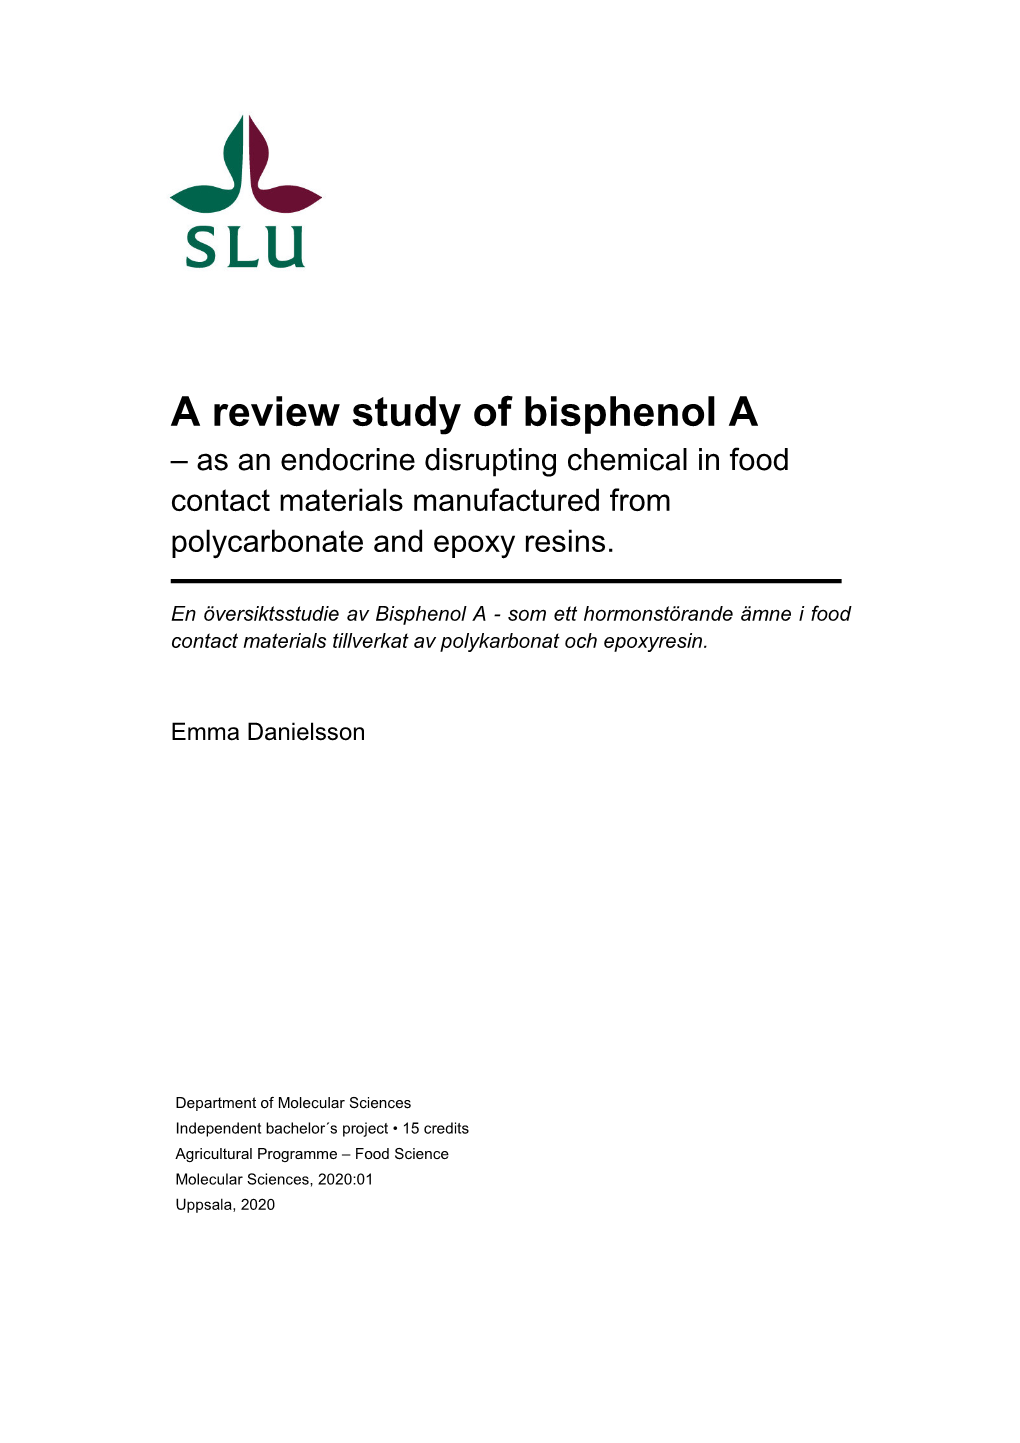 A Review Study of Bisphenol a – As an Endocrine Disrupting Chemical in Food Contact Materials Manufactured from Polycarbonate and Epoxy Resins